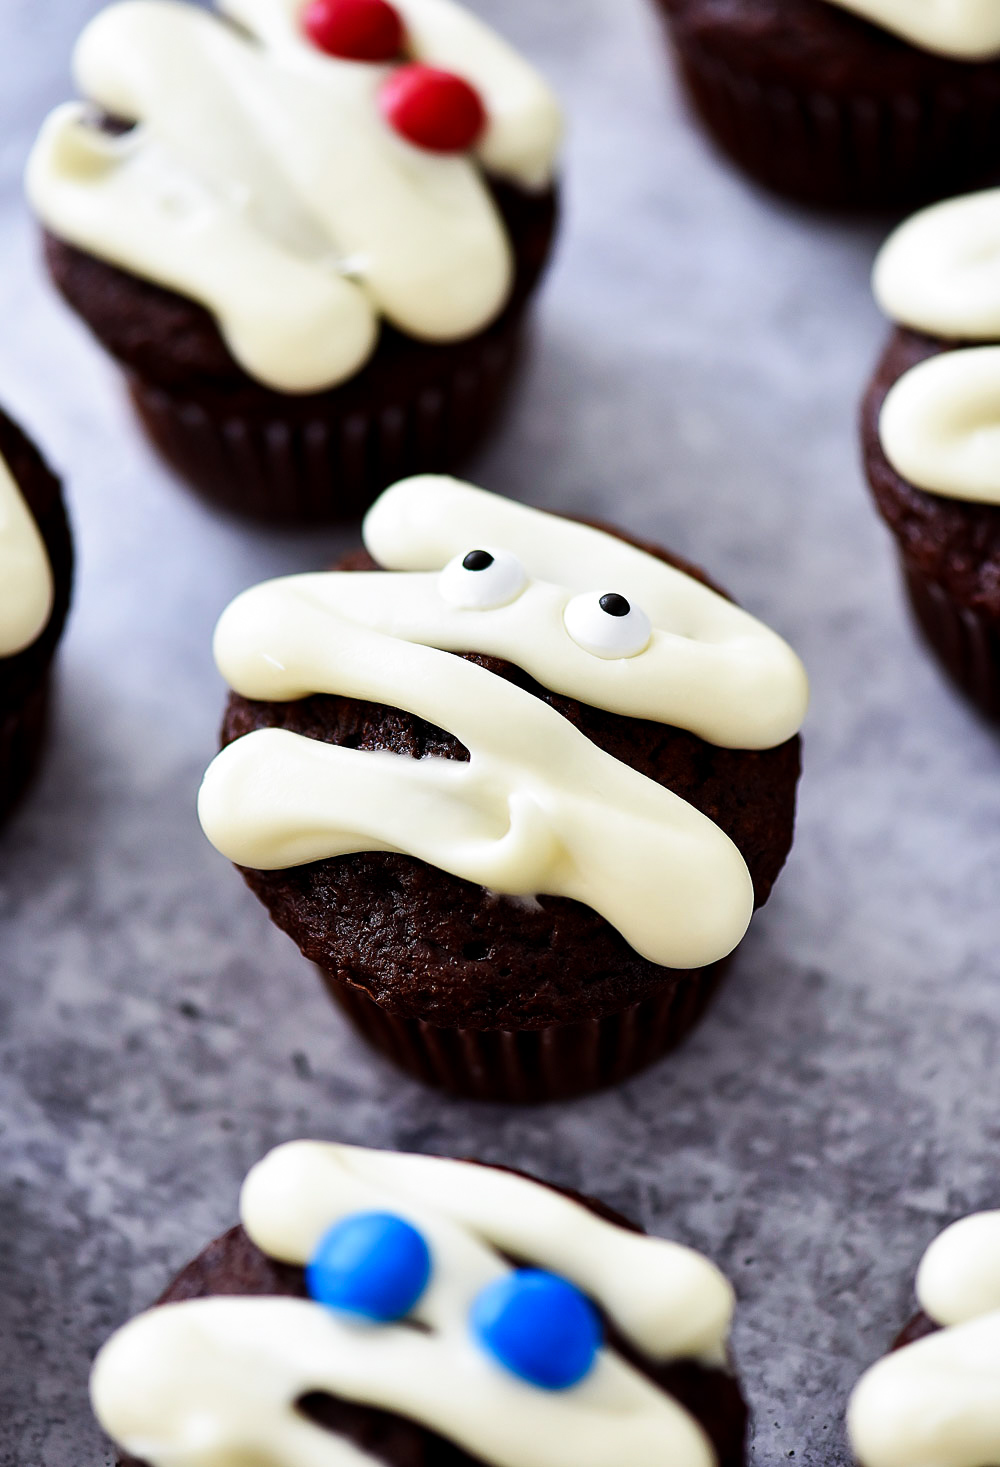 Mummy Cupcakes are delicious chocolate cupcakes decorated to look like mummies. Life-in-the-Lofthouse.com